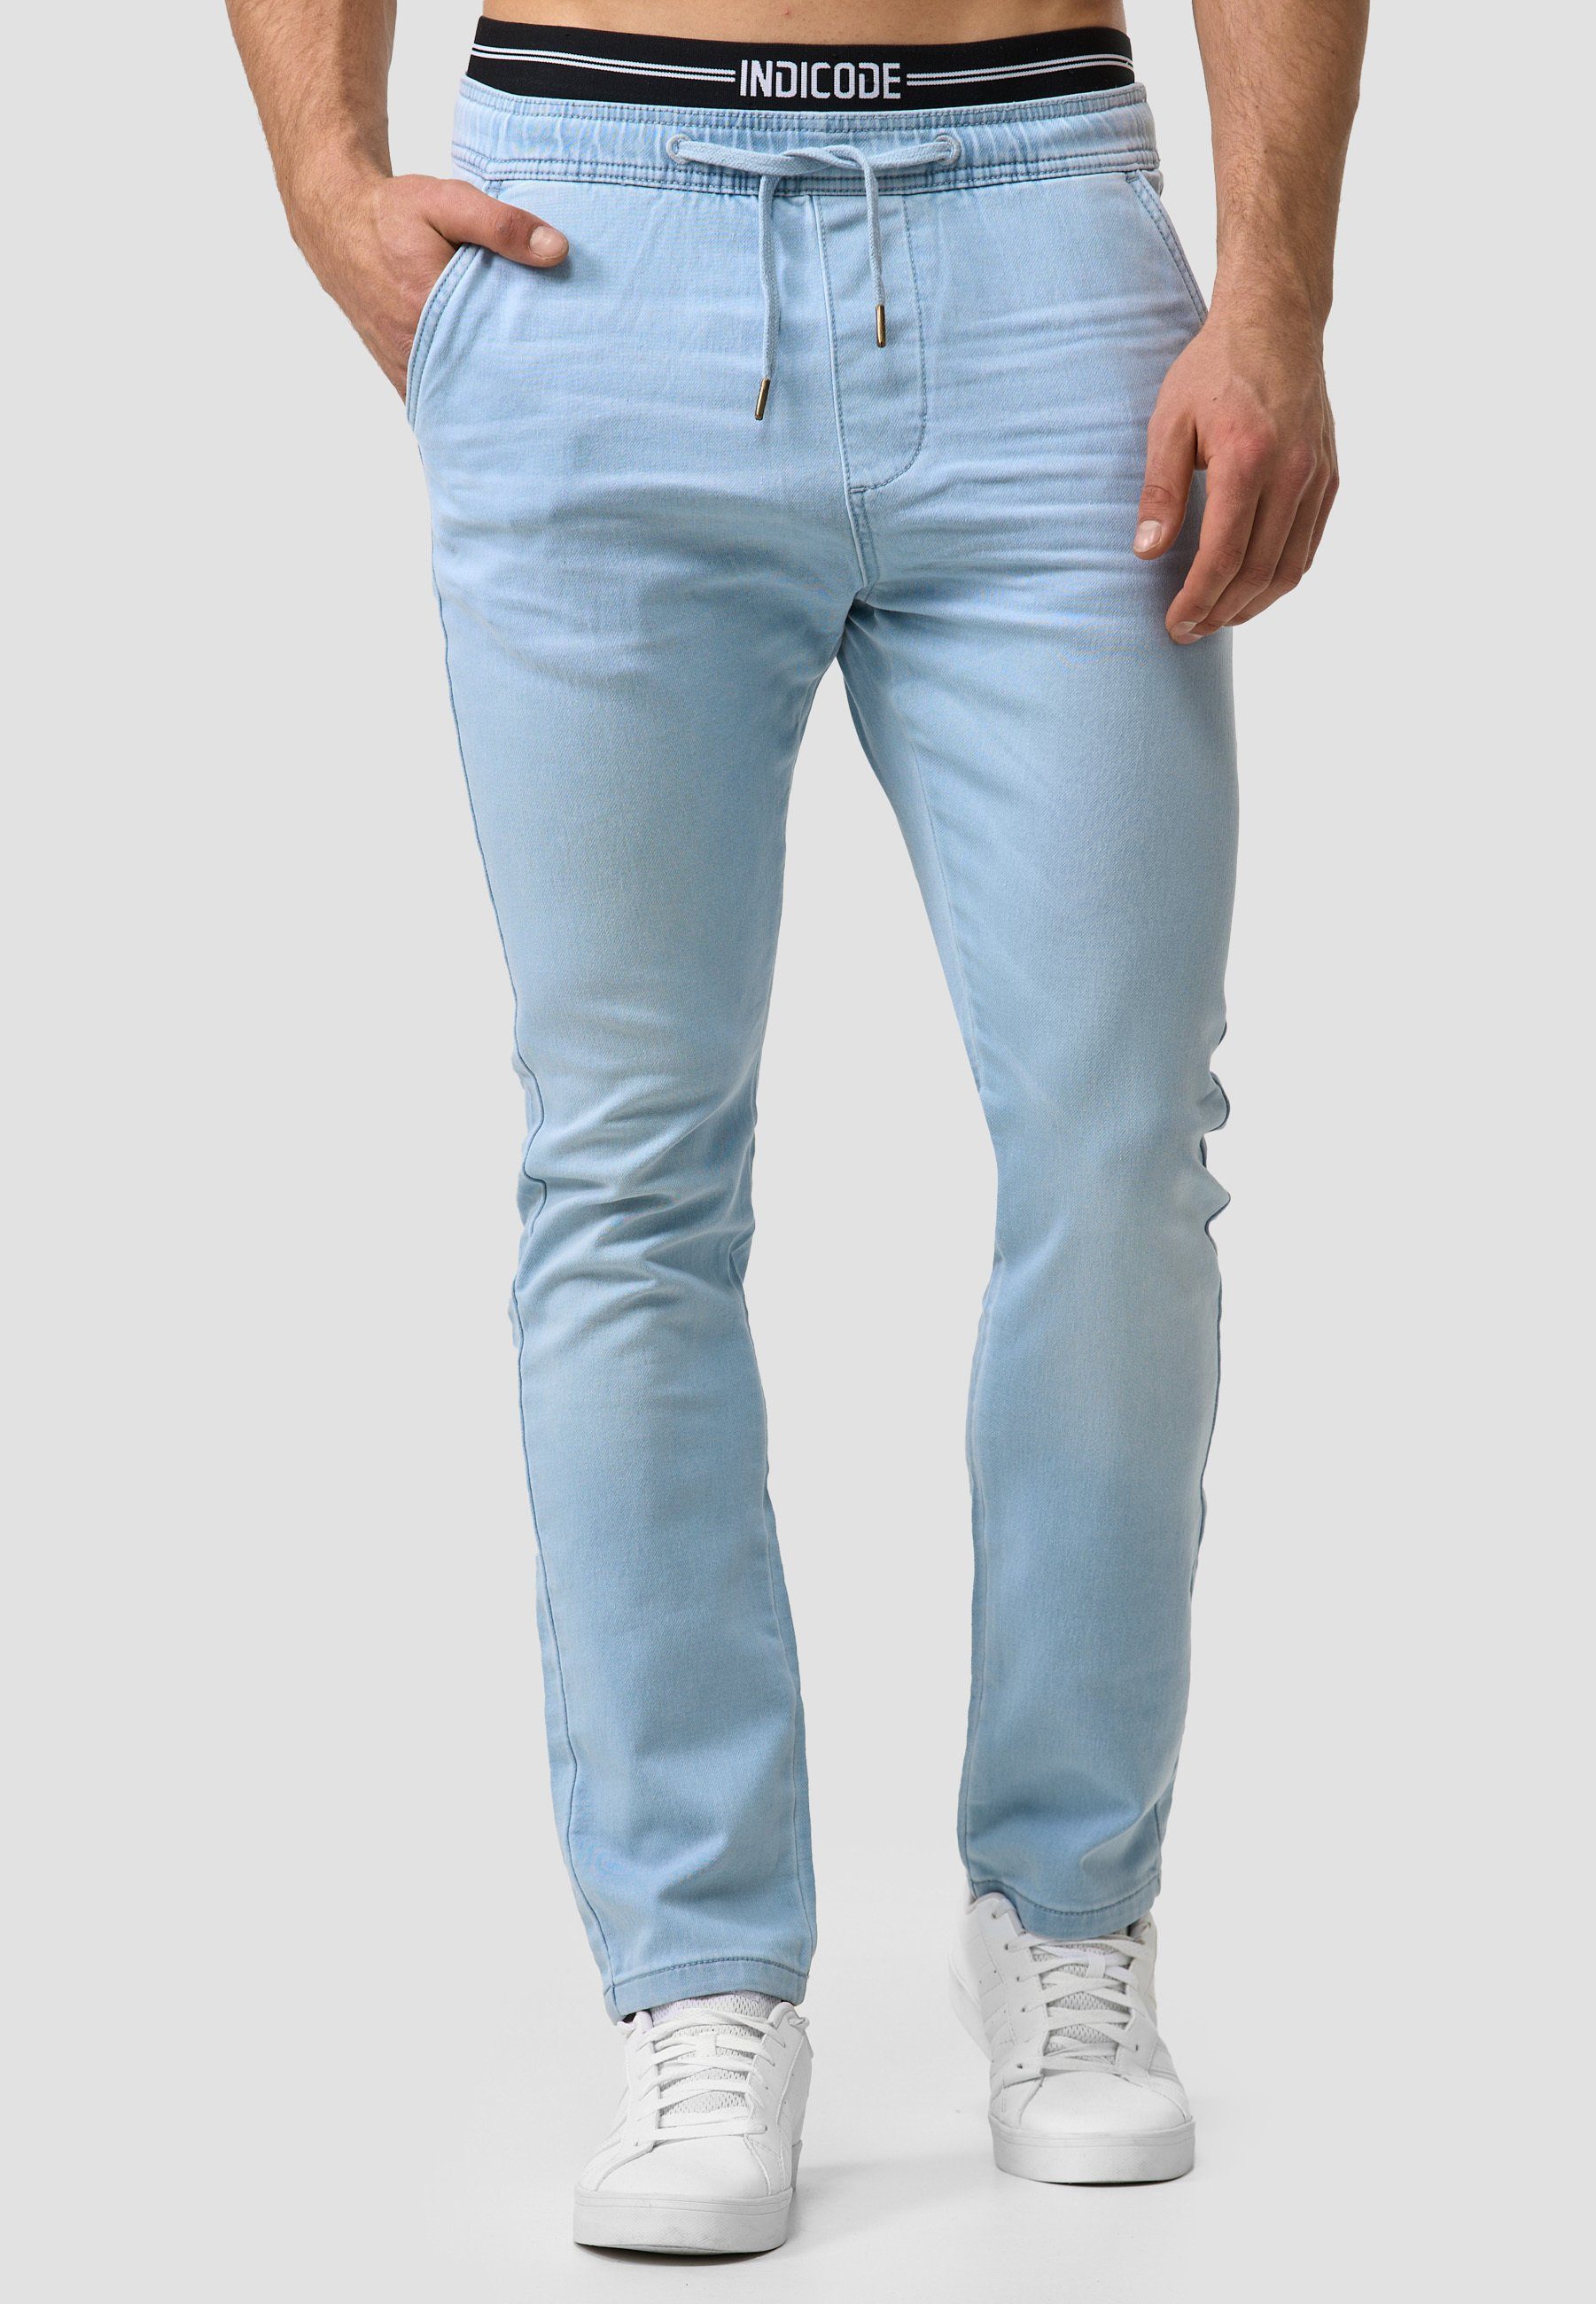 Indicode Bequeme Jeans Alban Sail Bleach | Straight-Fit Jeans